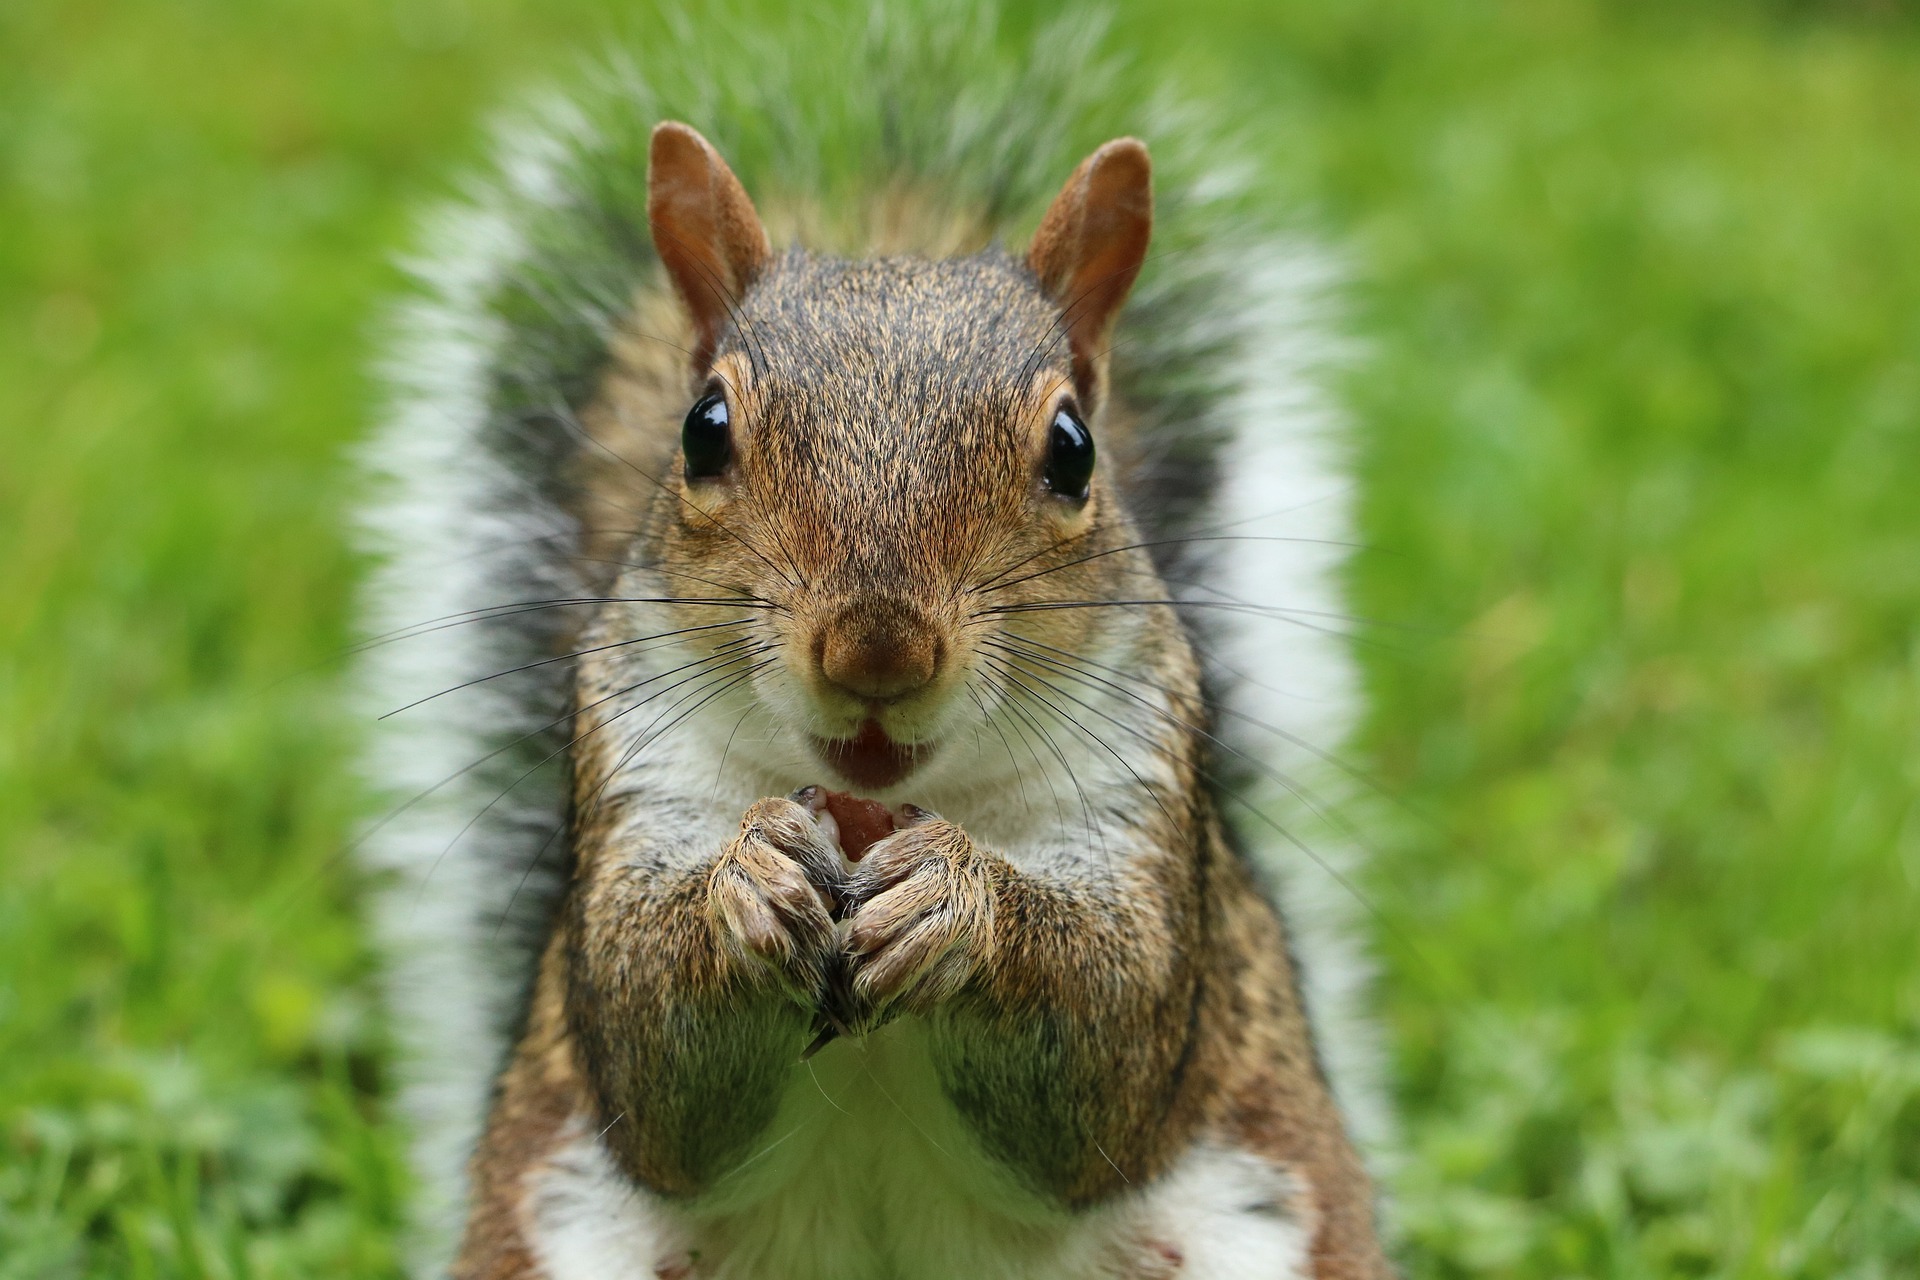 grey squirrel holding a nut looking at the camera